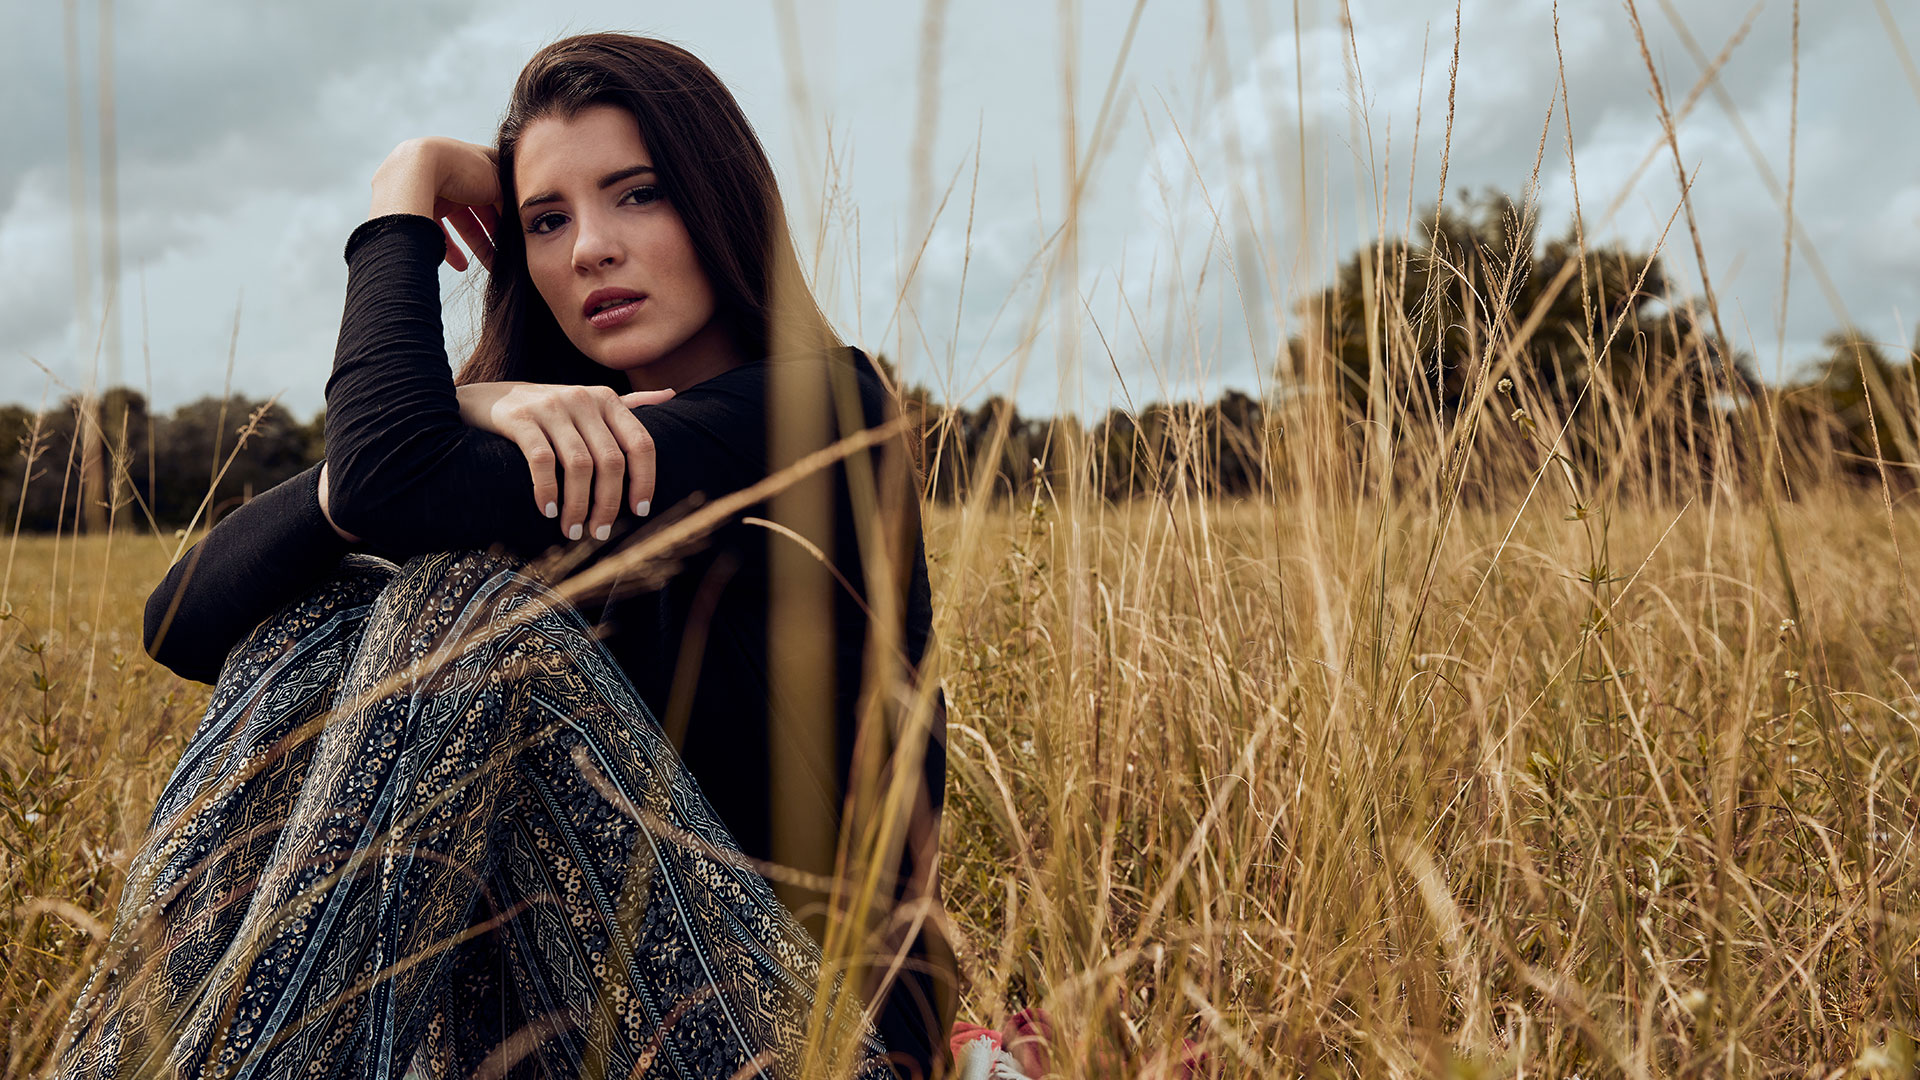 Fashion model sitting in field of tall grass photographed by women's apparel clothing photographer Kate Benson.